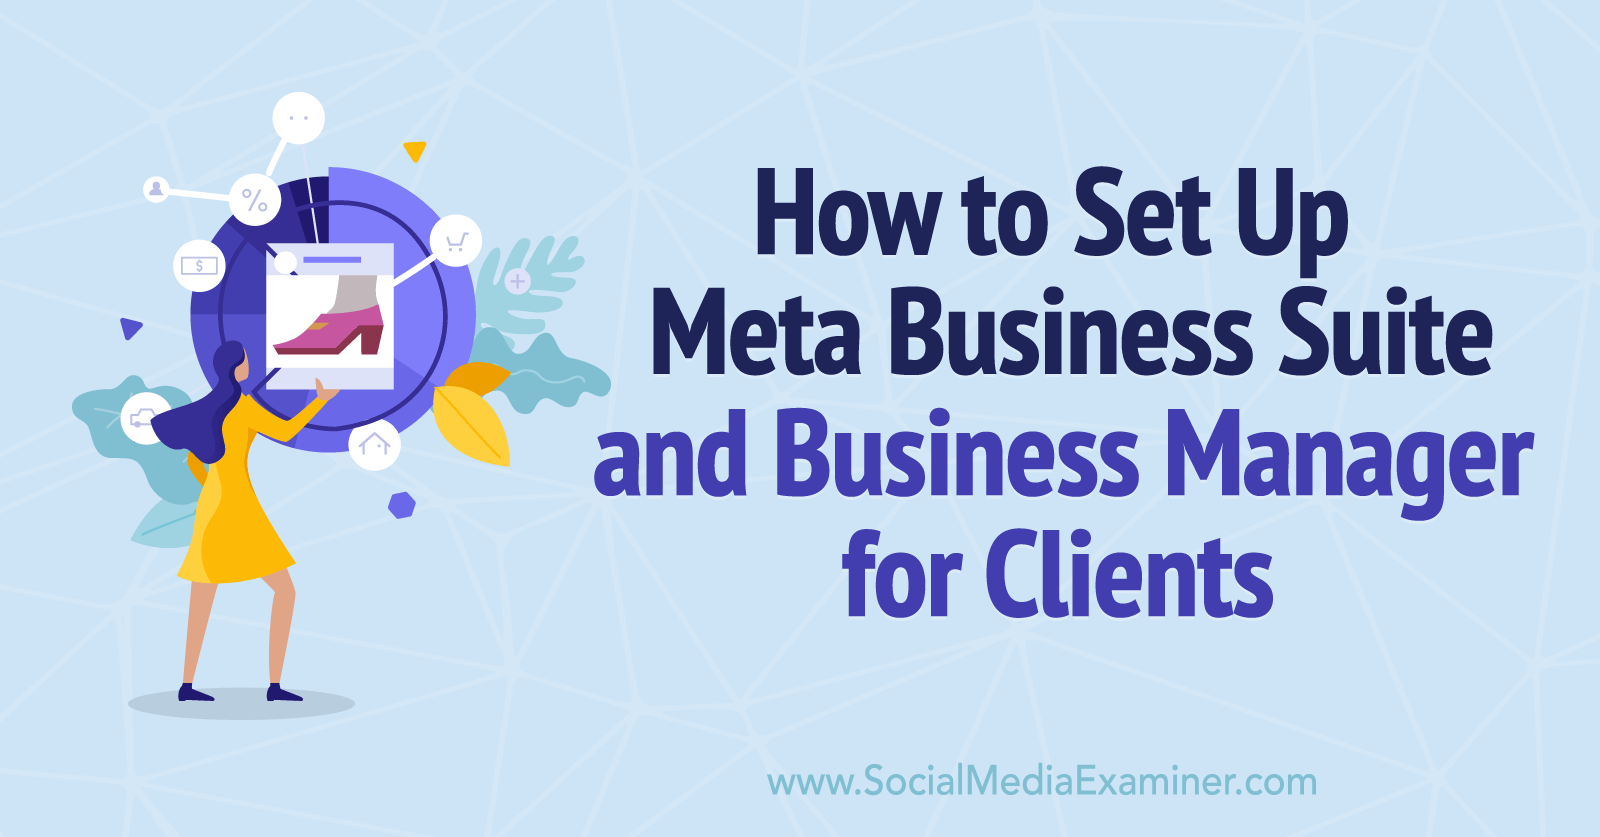 How to Set Up Meta Business Suite and Business Manager for Clients-Social Media Examiner